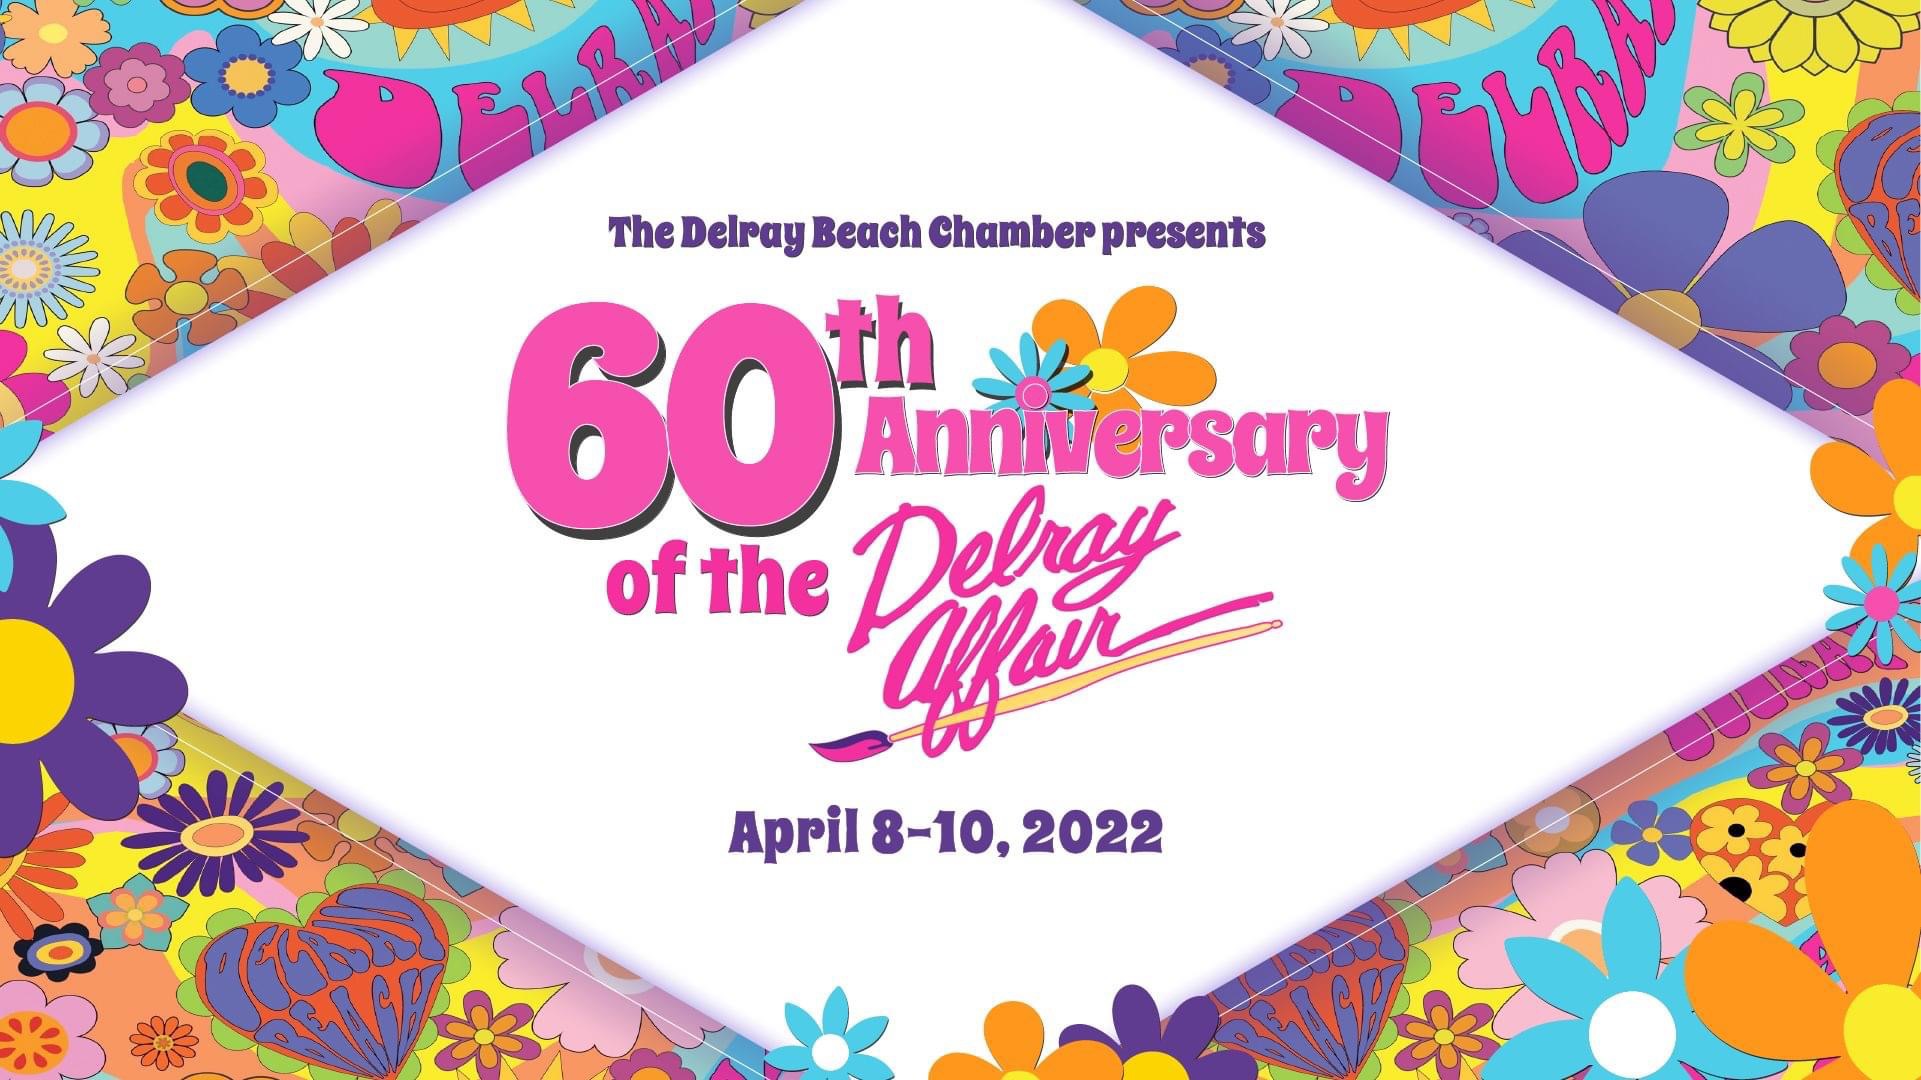 GREATER DELRAY BEACH CHAMBER OF COMMERCE PRESENTS 60TH ANNUAL DELRAY AFFAIR